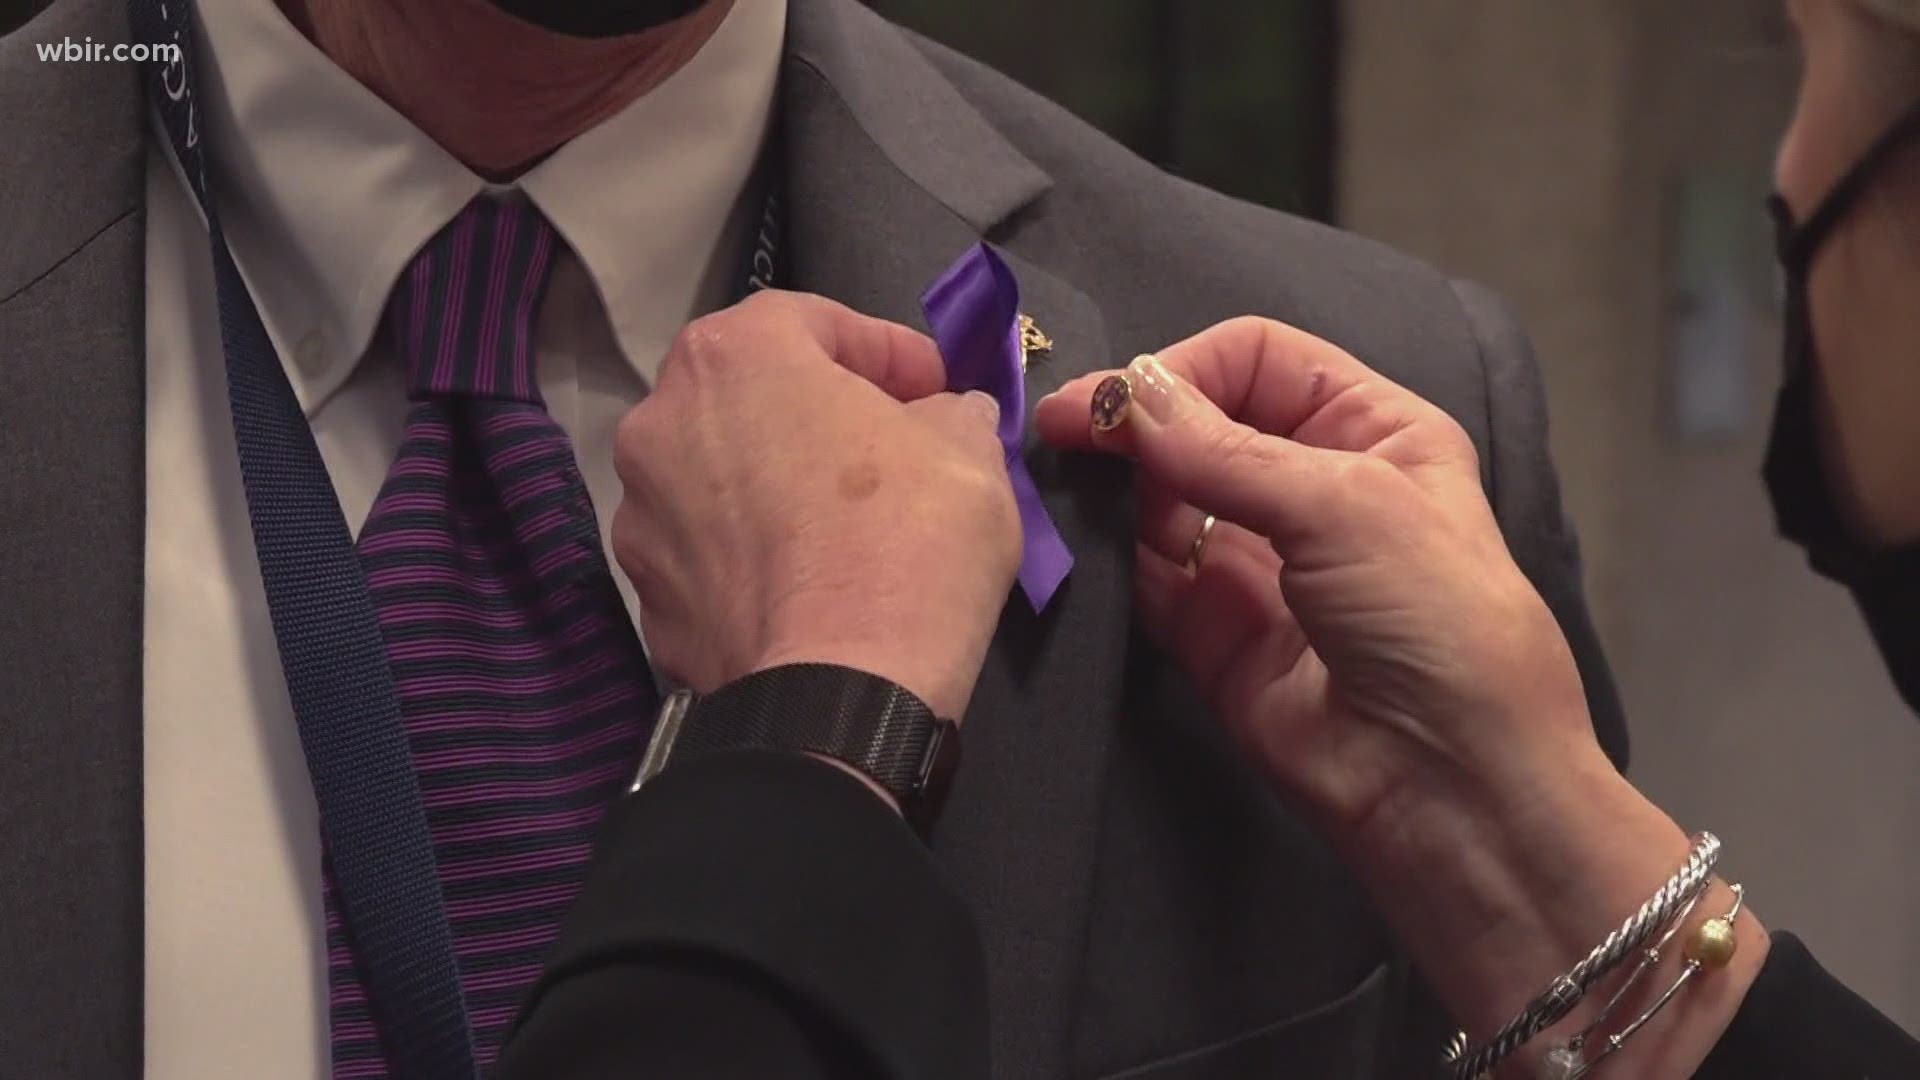 The organizations said people can wear purple or purple ribbons this week to honor victims of crime.